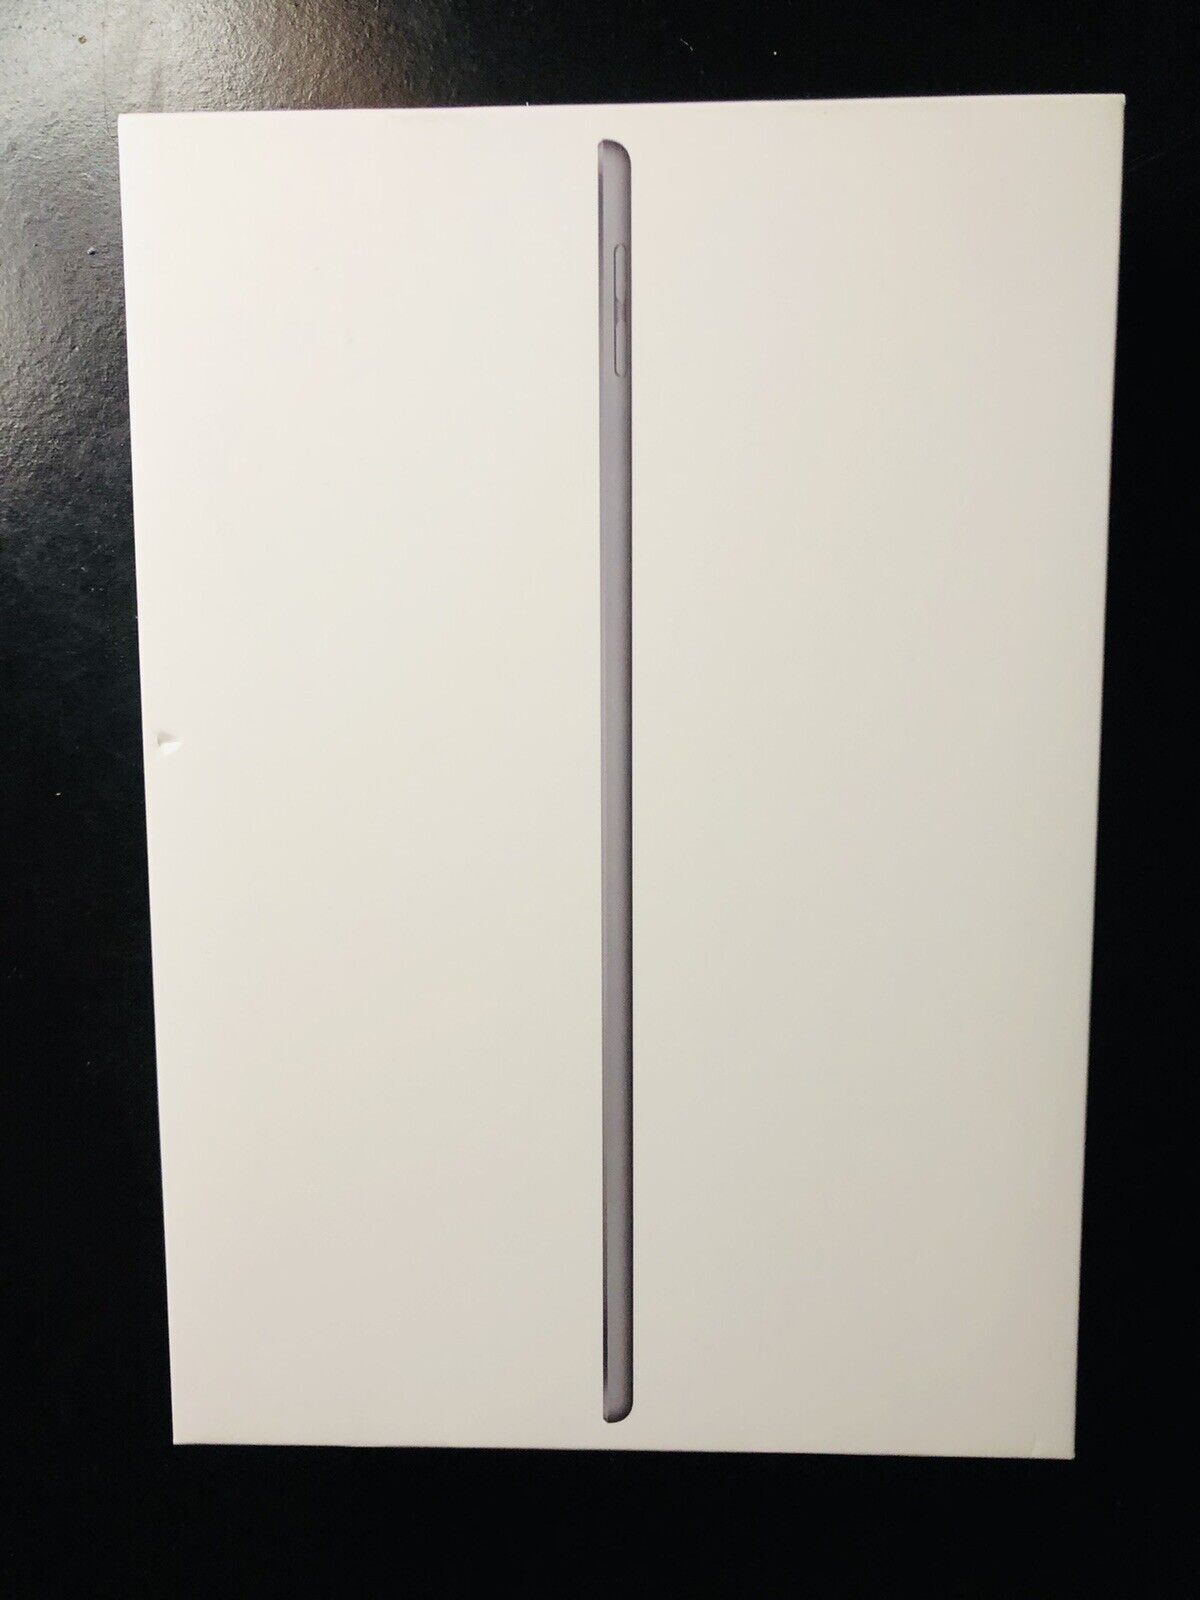 Apple iPad Air Silver 64 GB WIFI EMPTY BOX ONLY - This is just the Box